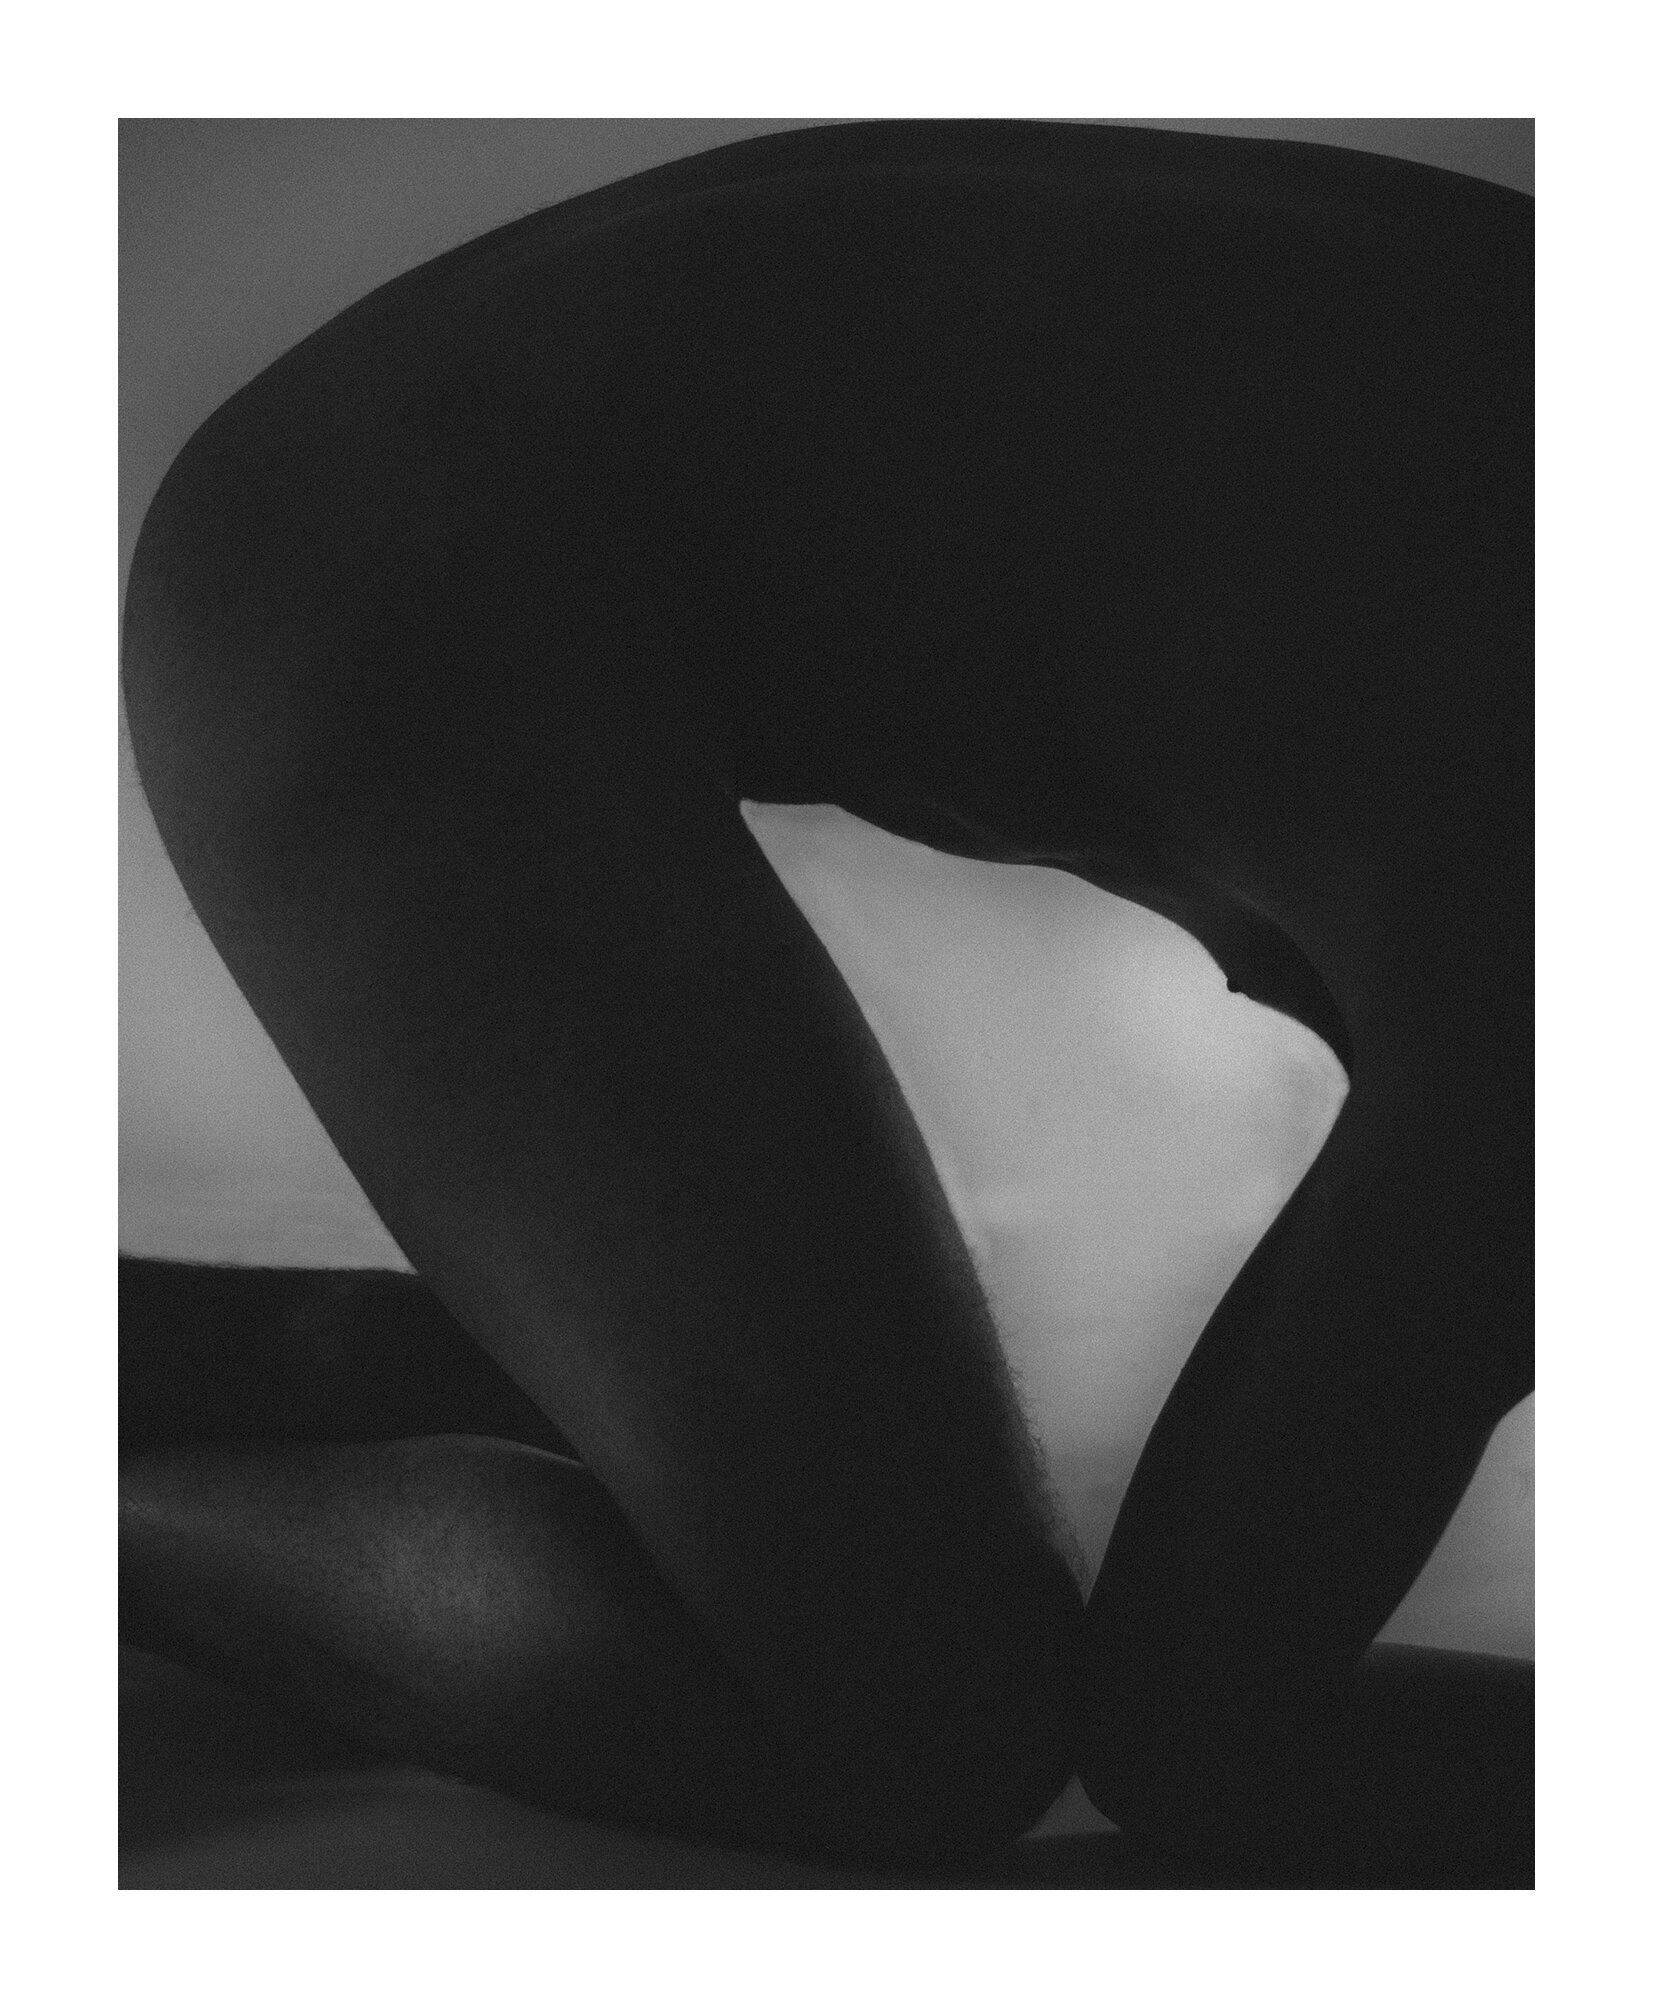  Nude, after Horst P. Horst 